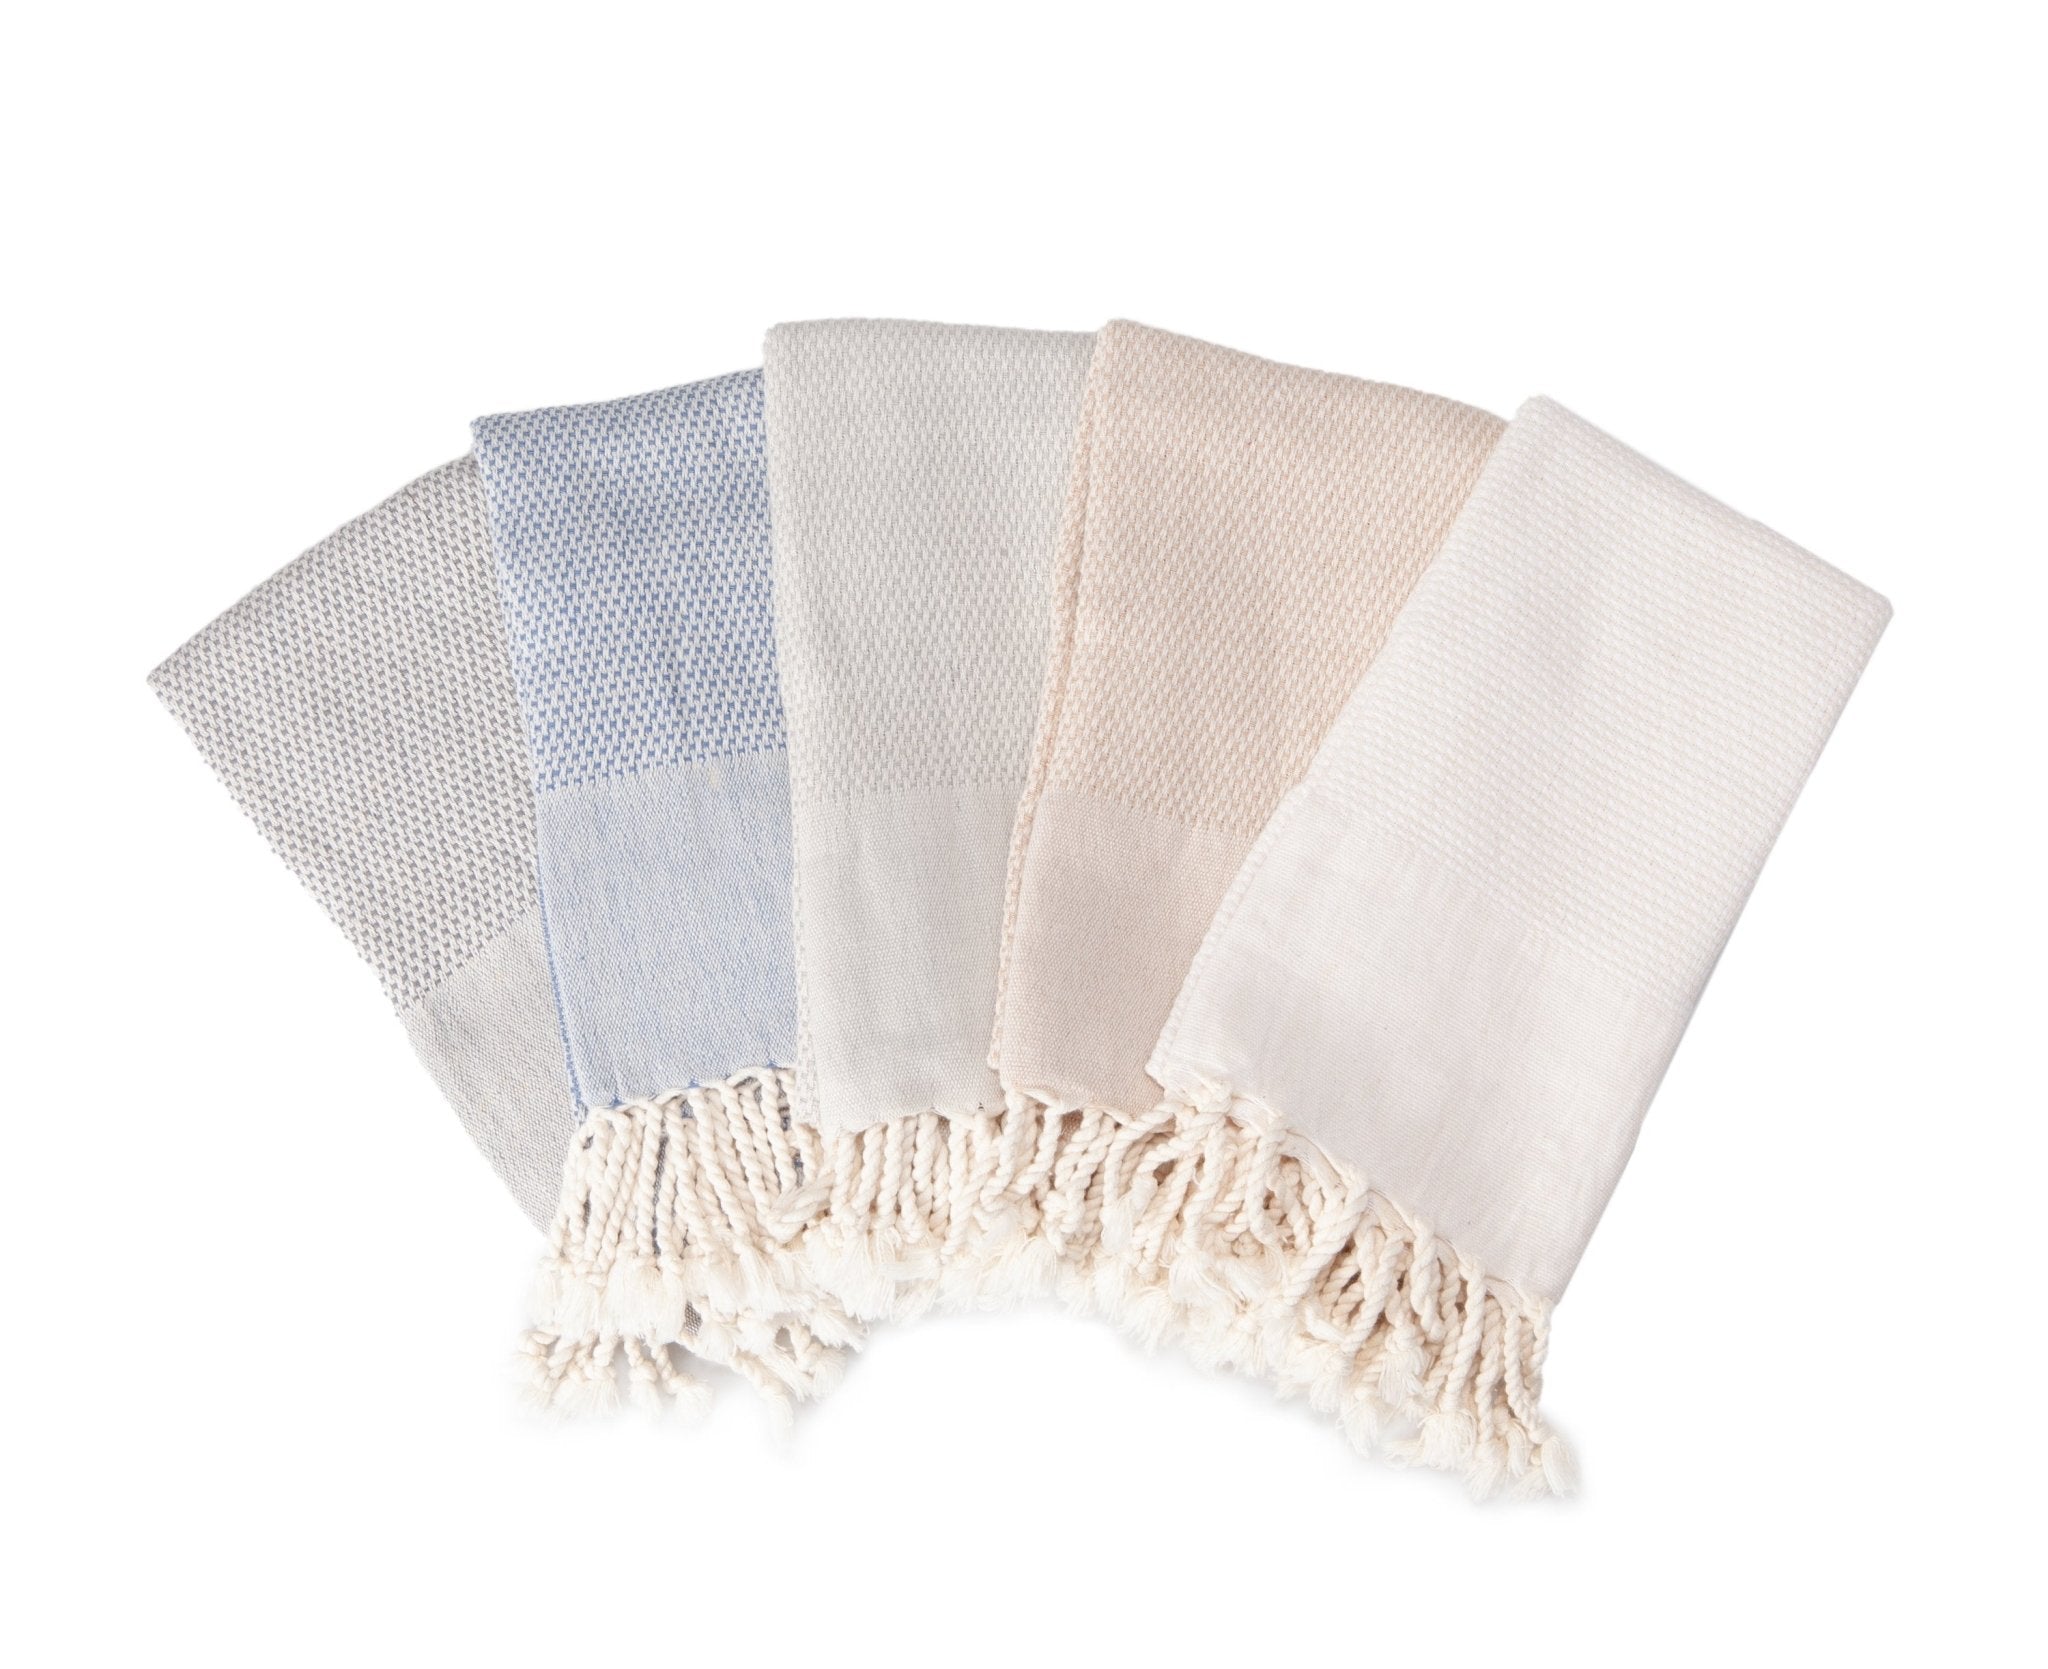 Enhance your Home Décor with Beautiful Turkish Towels and Blankets